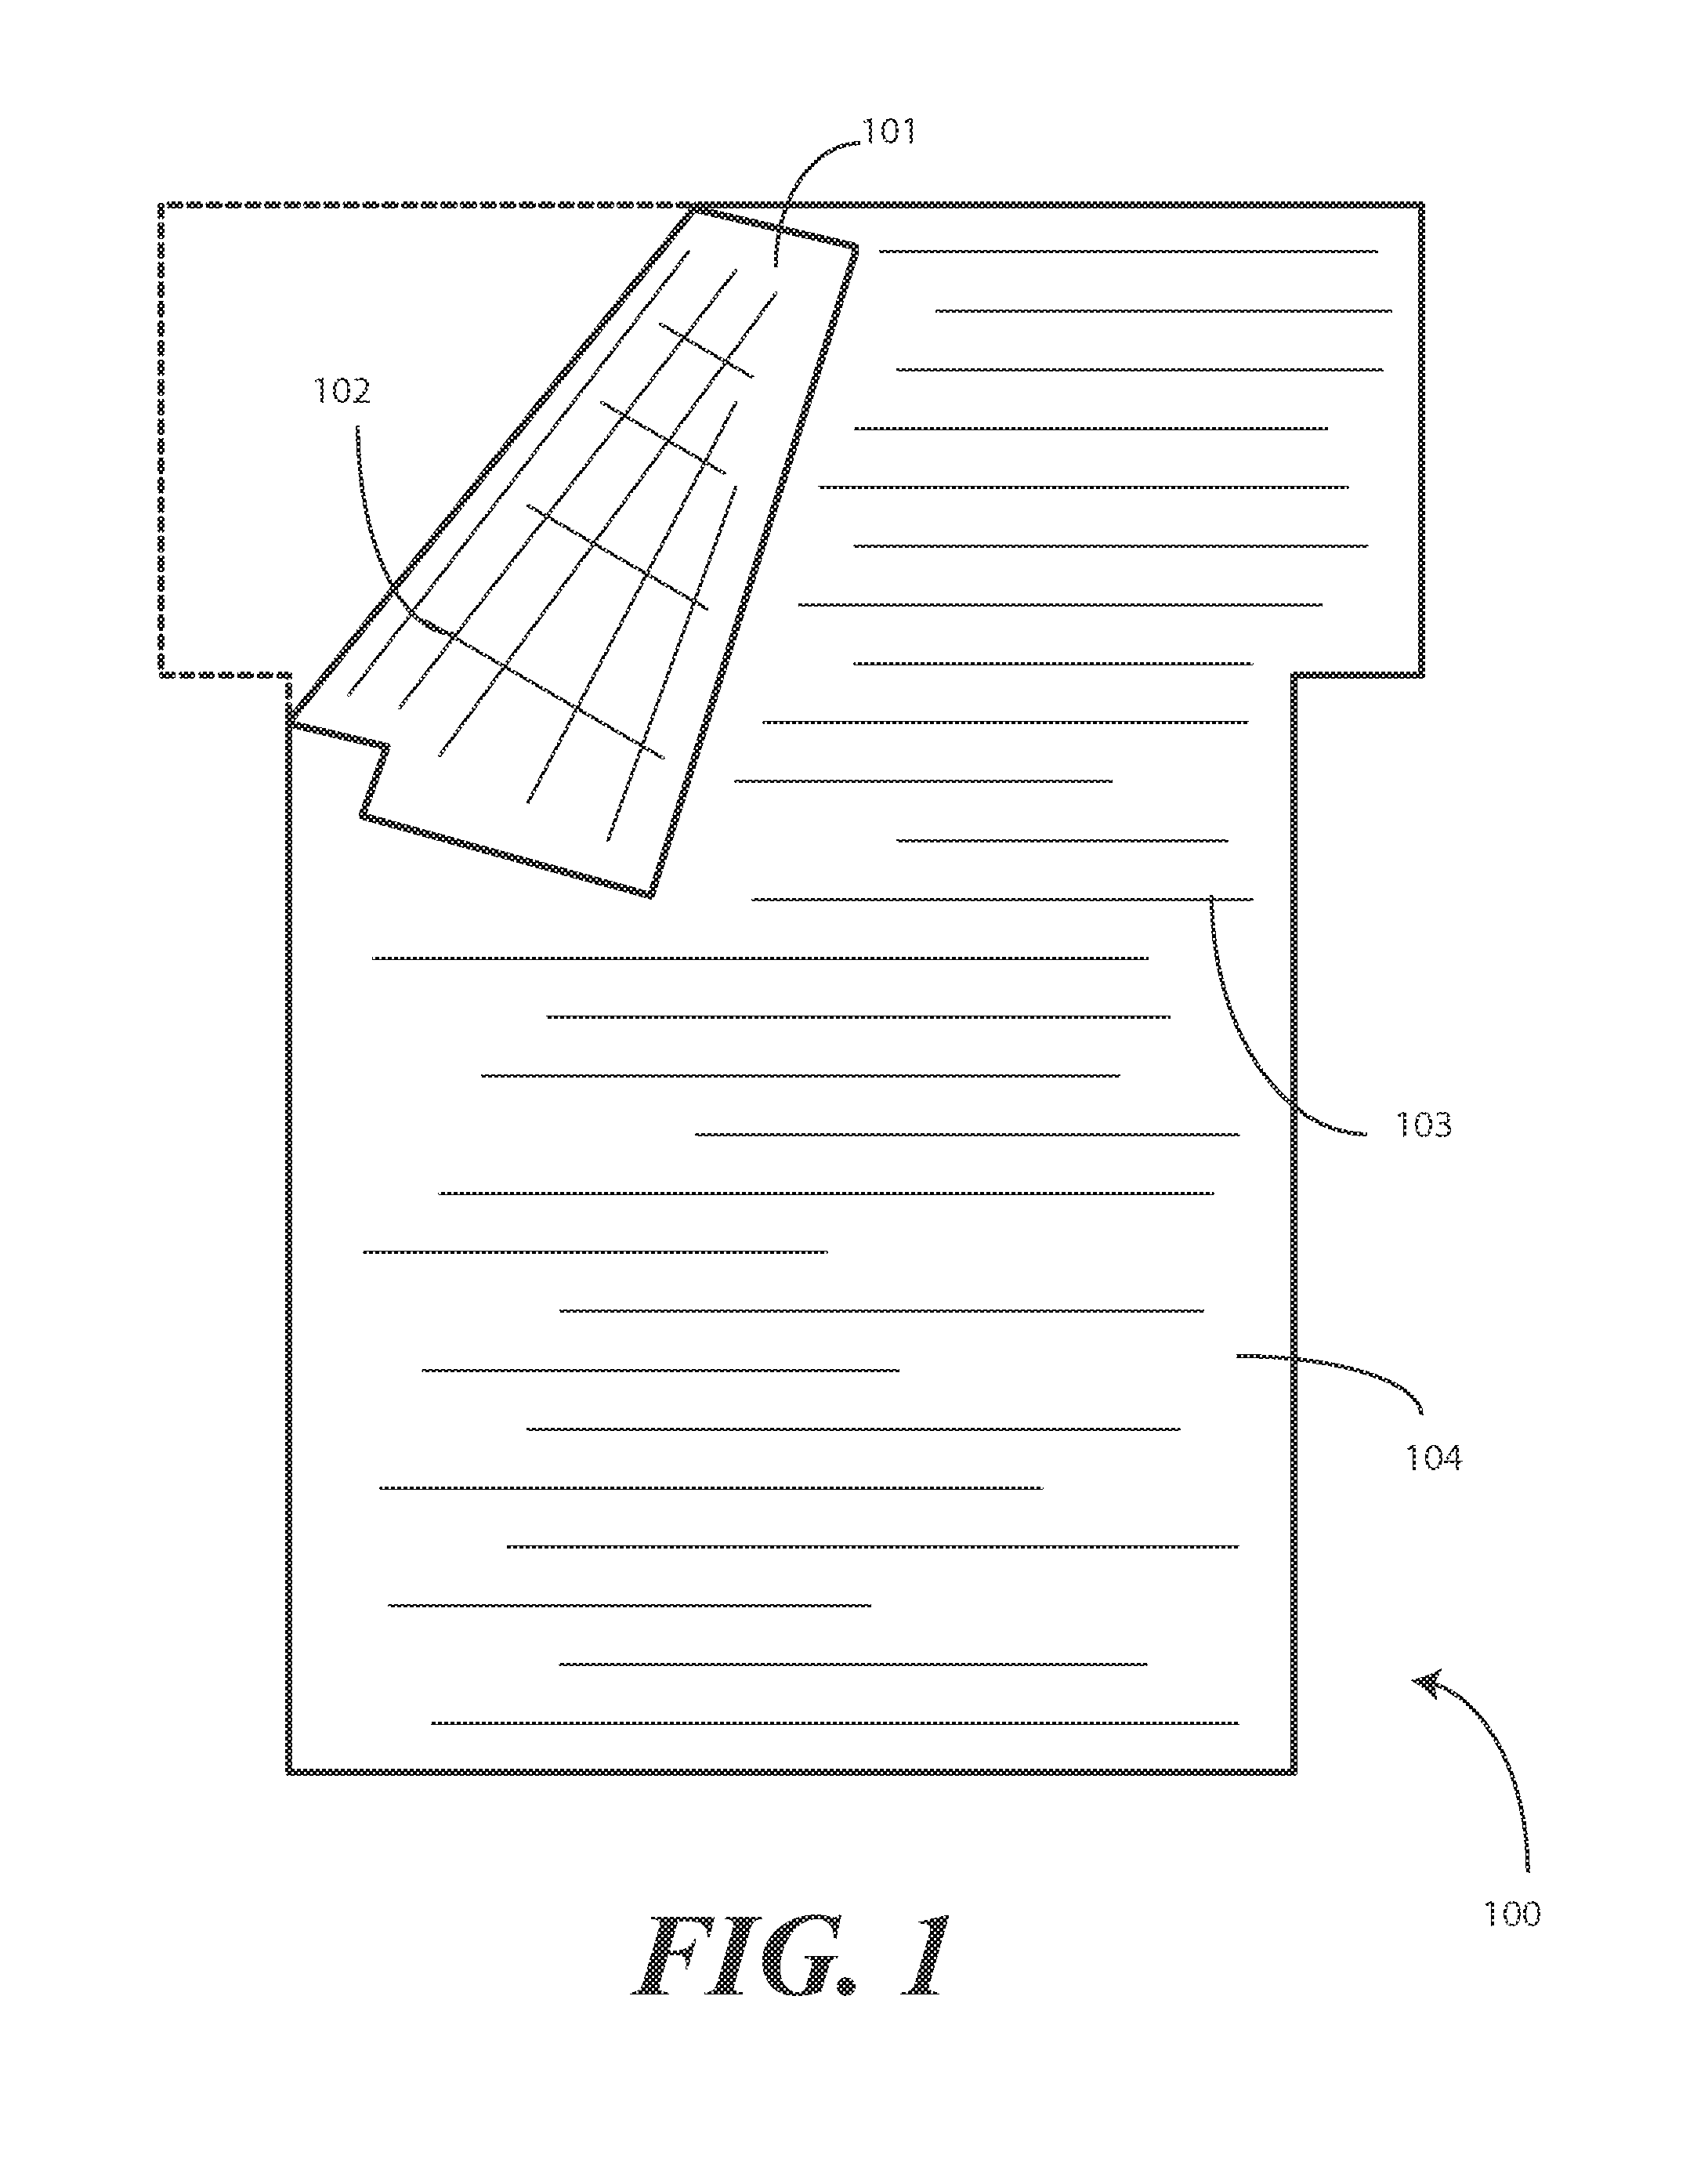 Patient Warming Blanket, Drape, and Corresponding Patient Warming System